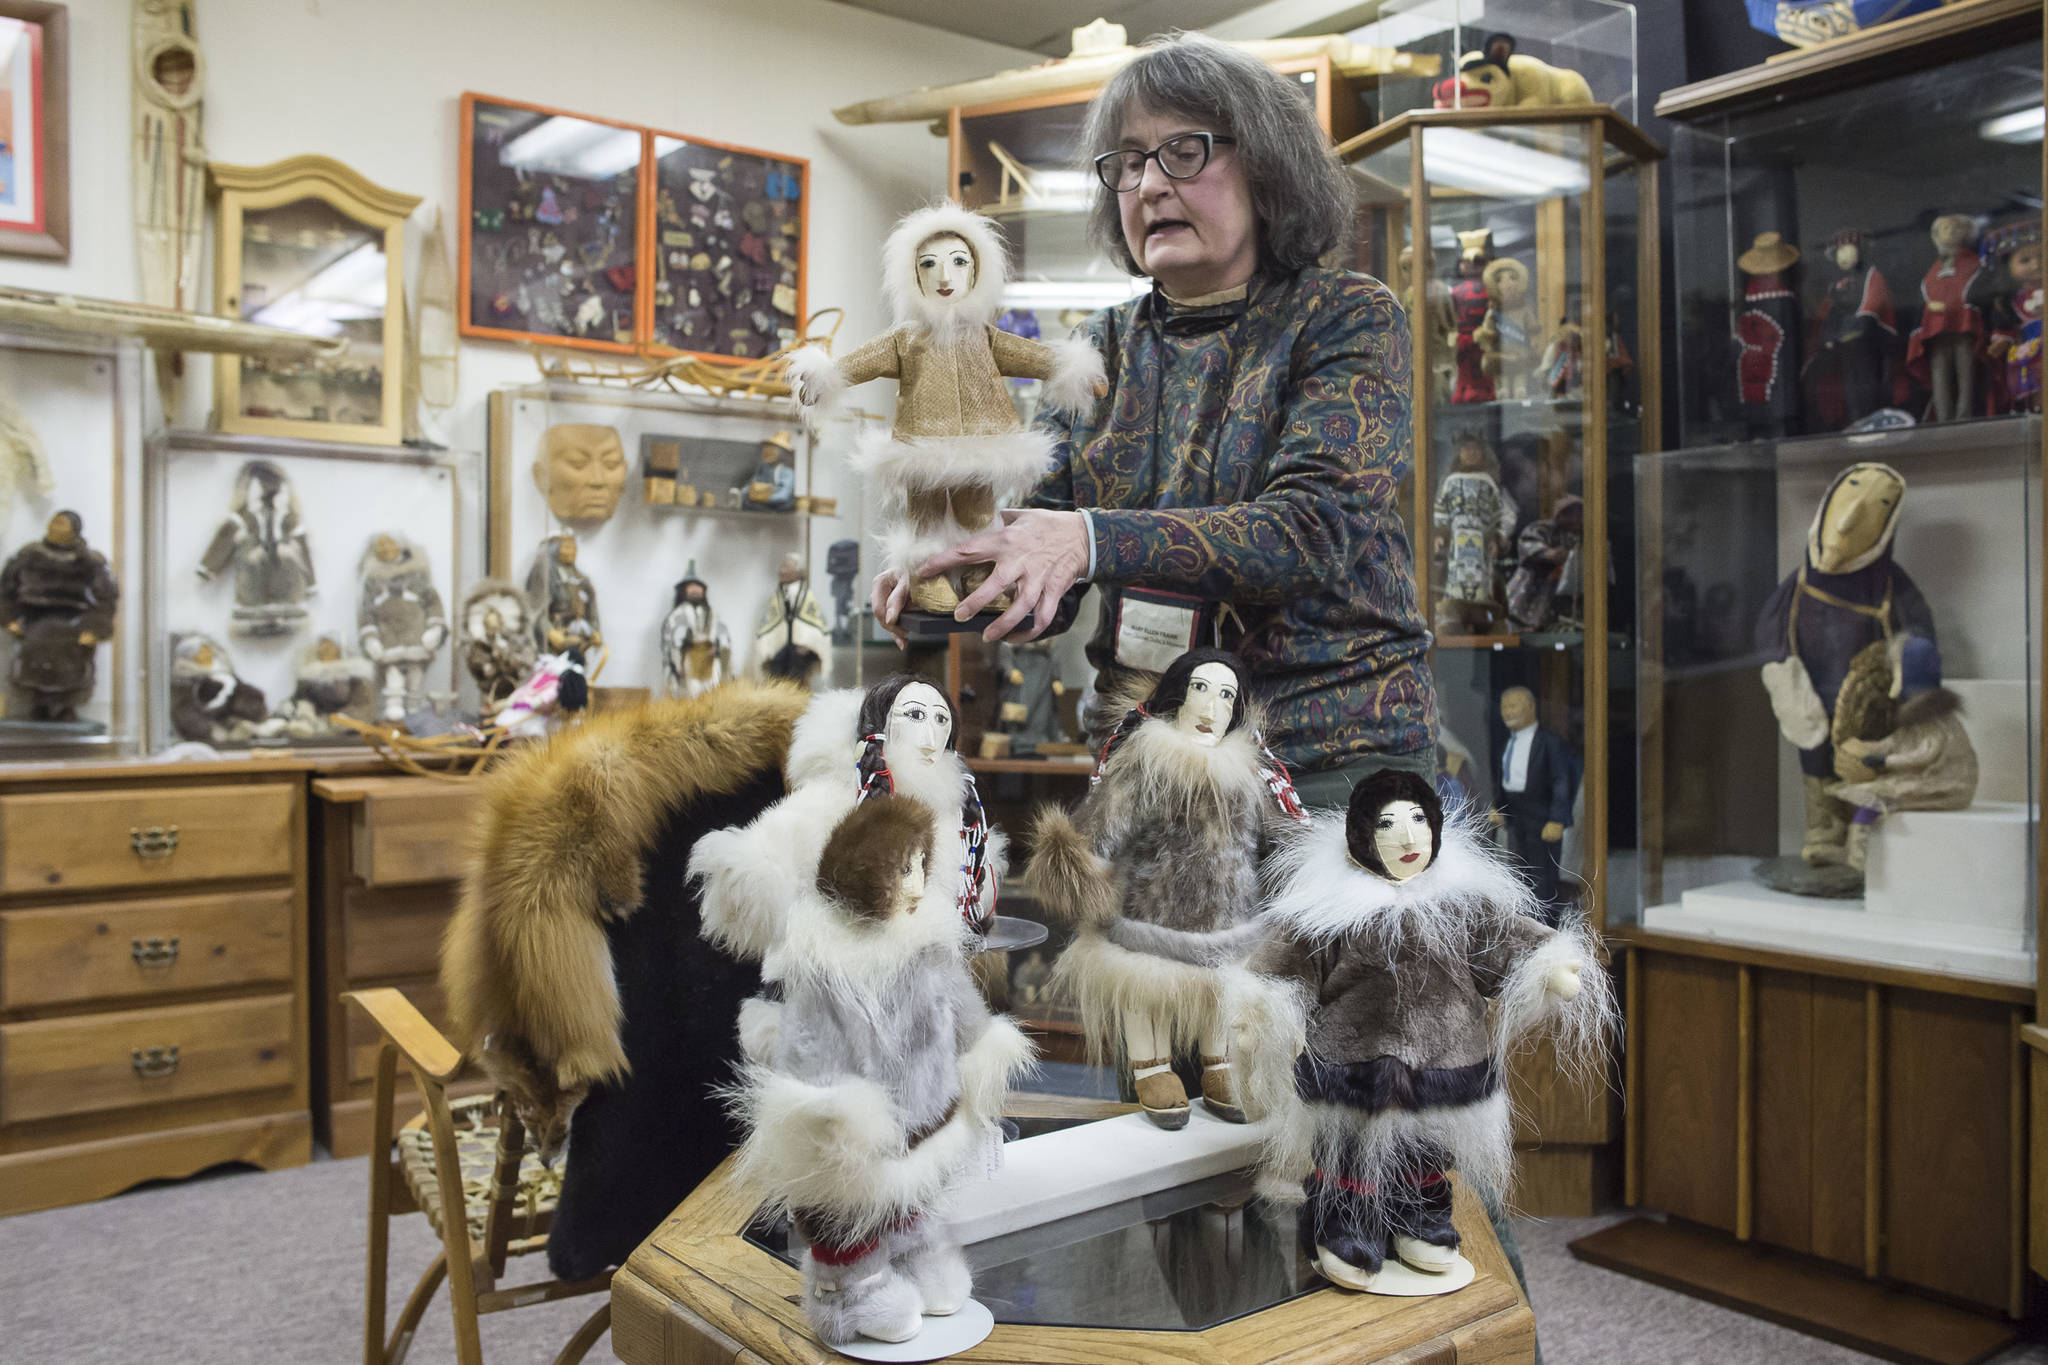 It’s a stitch: Handcrafted dolls featured at doll museum